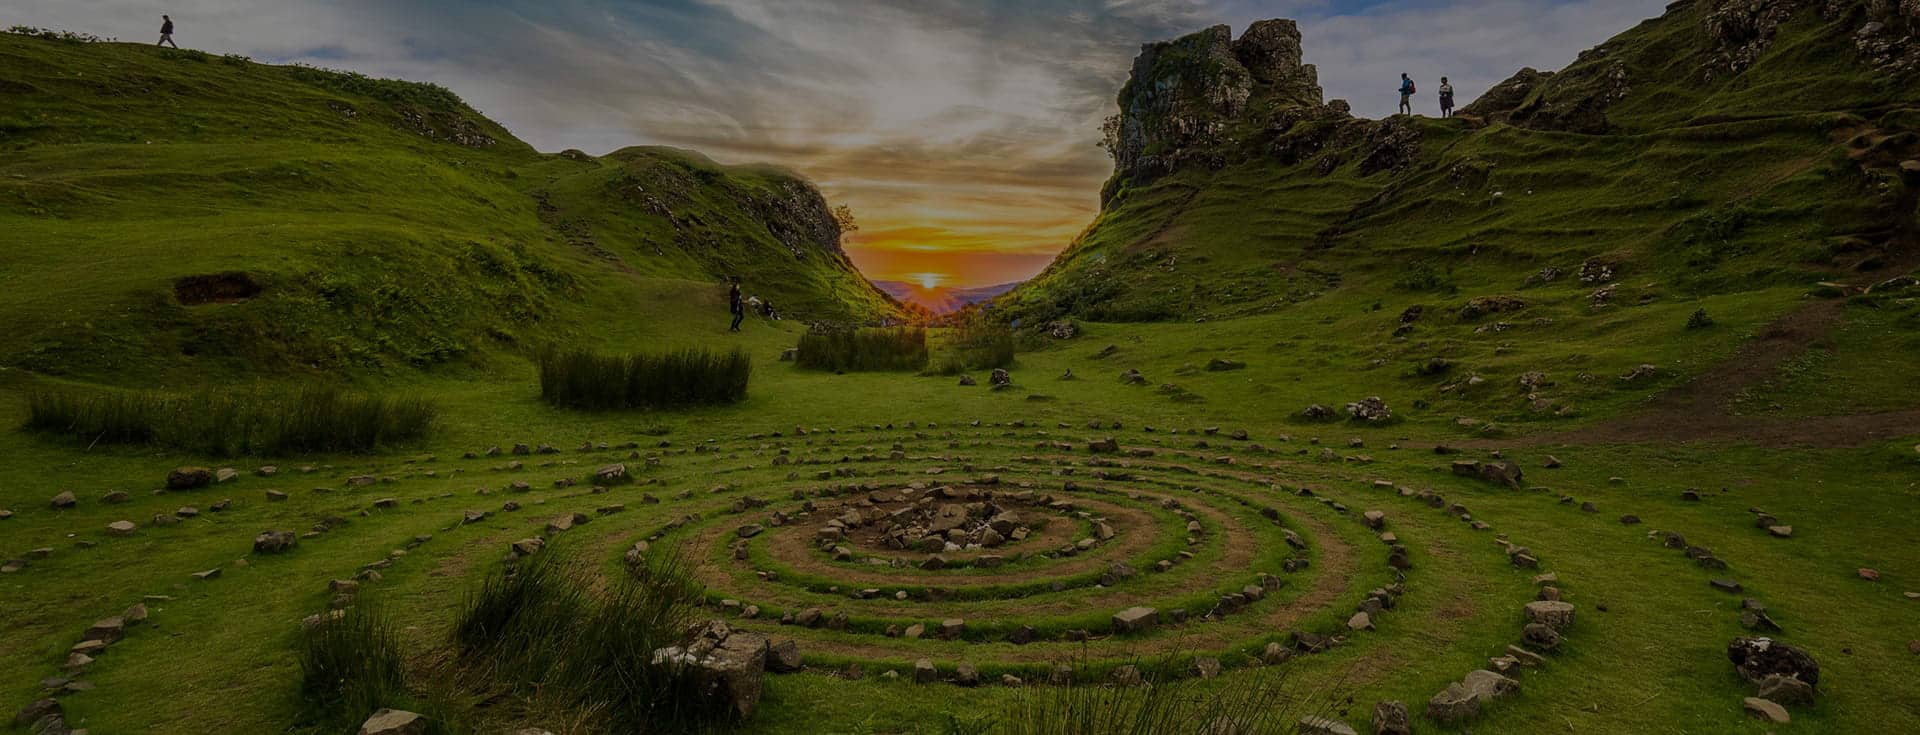 A photo of a spiral labyrinth in the foreground with mountains and sunset in the background. Everything is very green, indicating it might be spring or early summer.